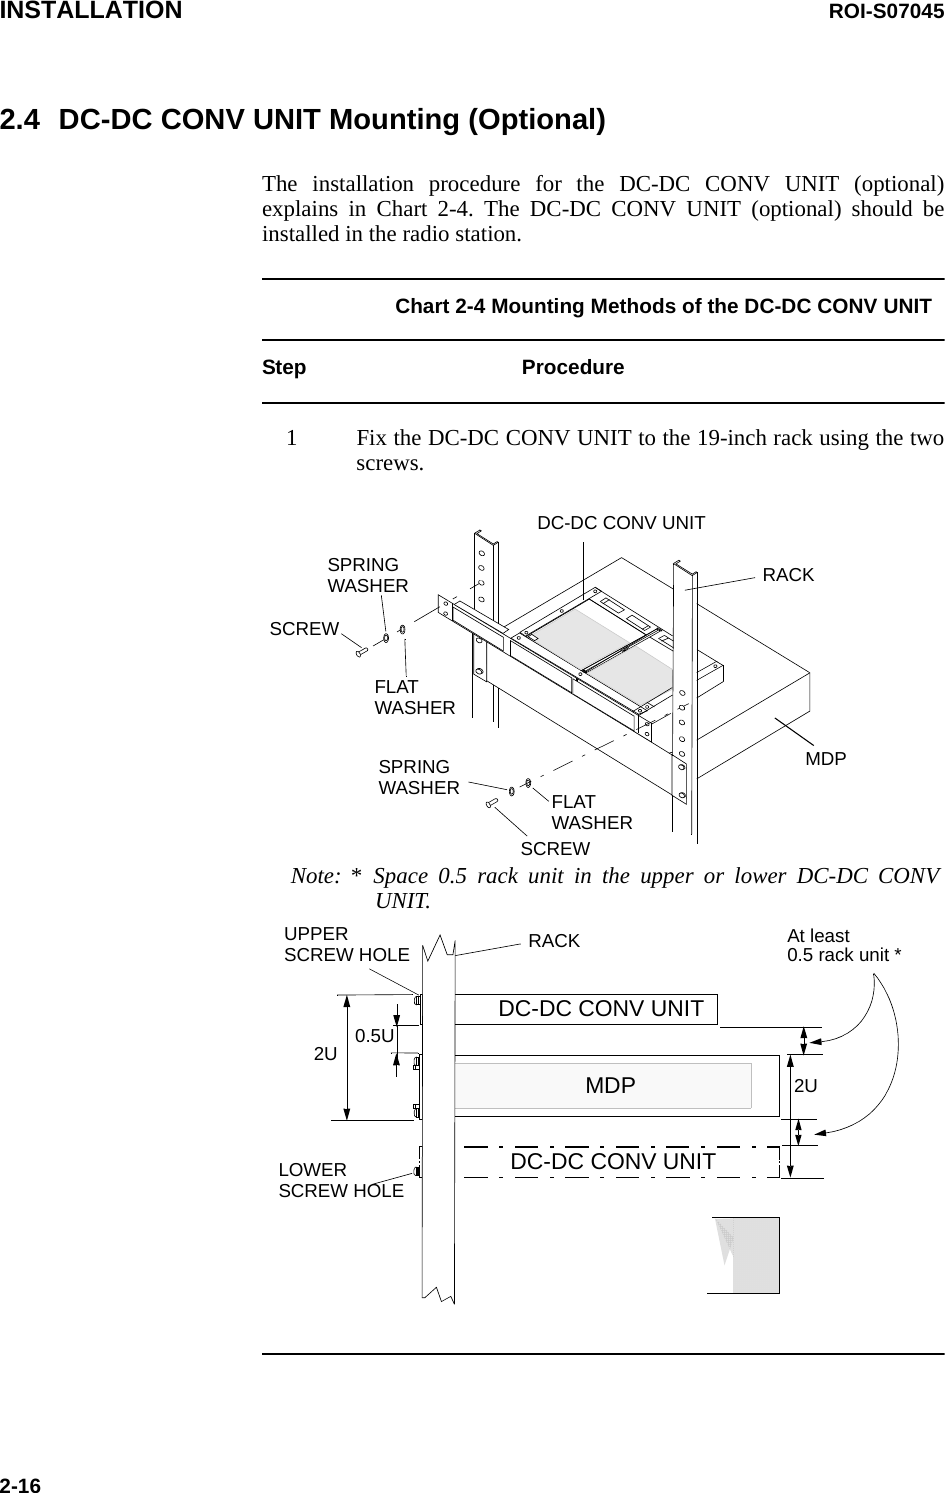 INSTALLATION ROI-S070452-162.4 DC-DC CONV UNIT Mounting (Optional)The installation procedure for the DC-DC CONV UNIT (optional)explains in Chart 2-4. The DC-DC CONV UNIT (optional) should beinstalled in the radio station.Chart 2-4 Mounting Methods of the DC-DC CONV UNITStep Procedure1 Fix the DC-DC CONV UNIT to the 19-inch rack using the twoscrews.At least 0.5 rack unit *MDPDC-DC CONV UNITSCREWSPRINGWASHERSCREWFLATSPRINGWASHERWASHER2U 0.5UMDPDC-DC CONV UNITDC-DC CONV UNITRACKUPPERSCREW HOLELOWERSCREW HOLENote: * Space 0.5 rack unit in the upper or lower DC-DC CONVUNIT.2UFLATWASHERDC-DC CONV UNITRACK